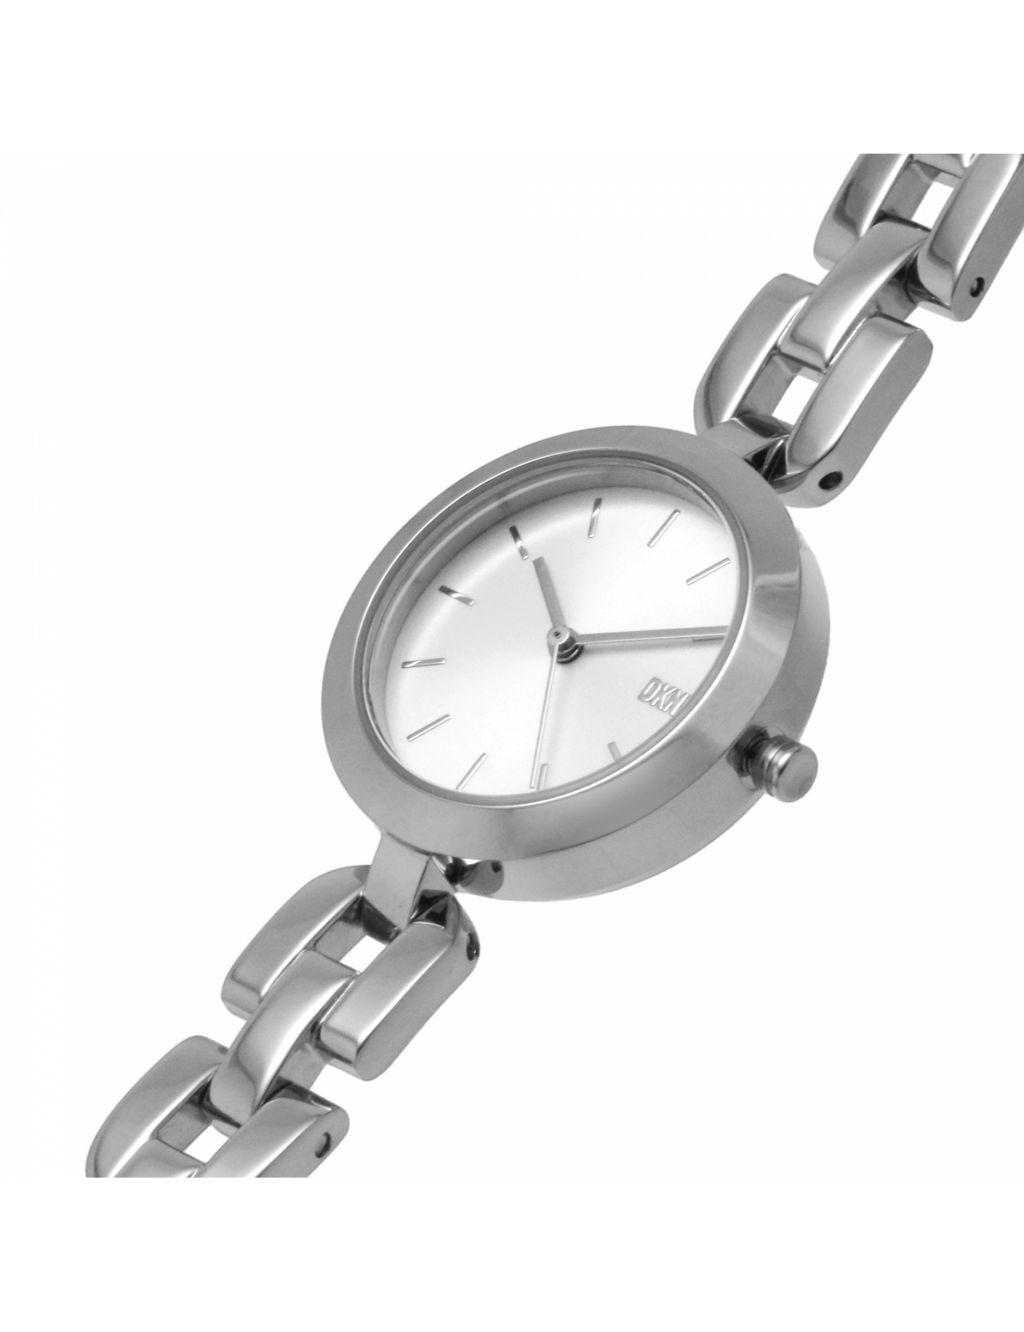 DKNY City Link Silver Watch image 3